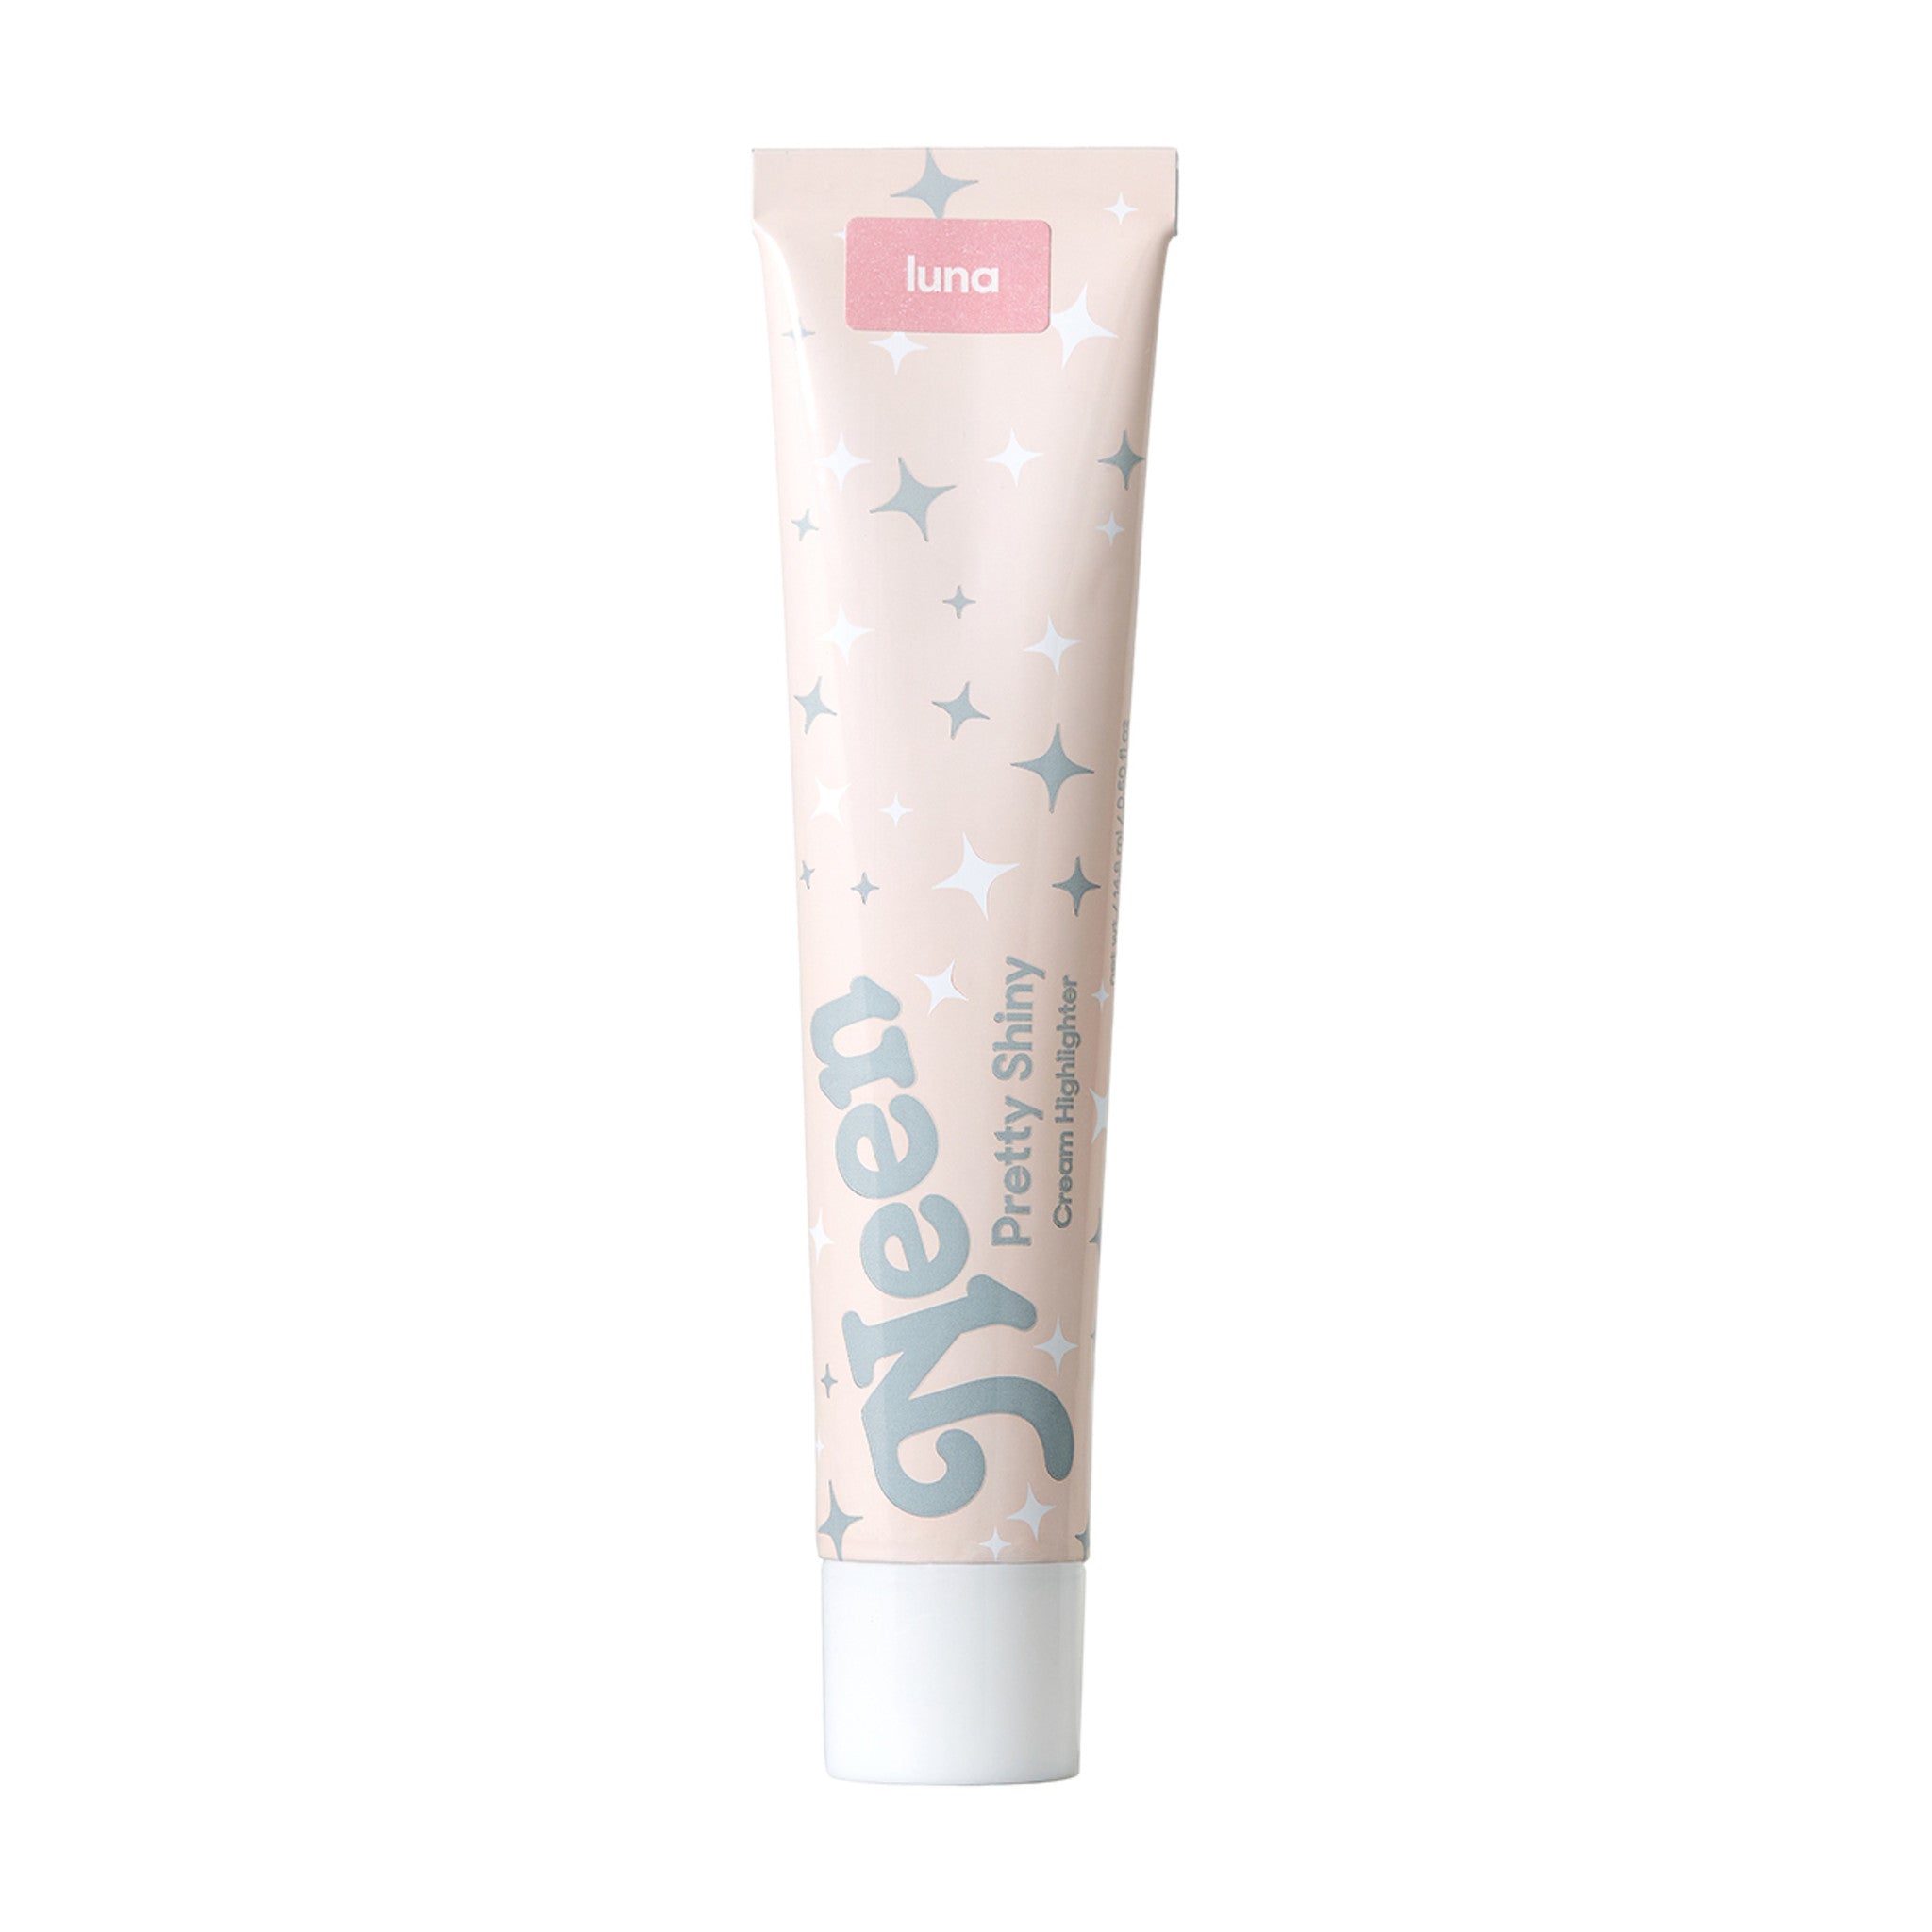 Neen Pretty Shiny Cream Highlighter  Color/Shade variant: Luna main image. This product is in the color pink